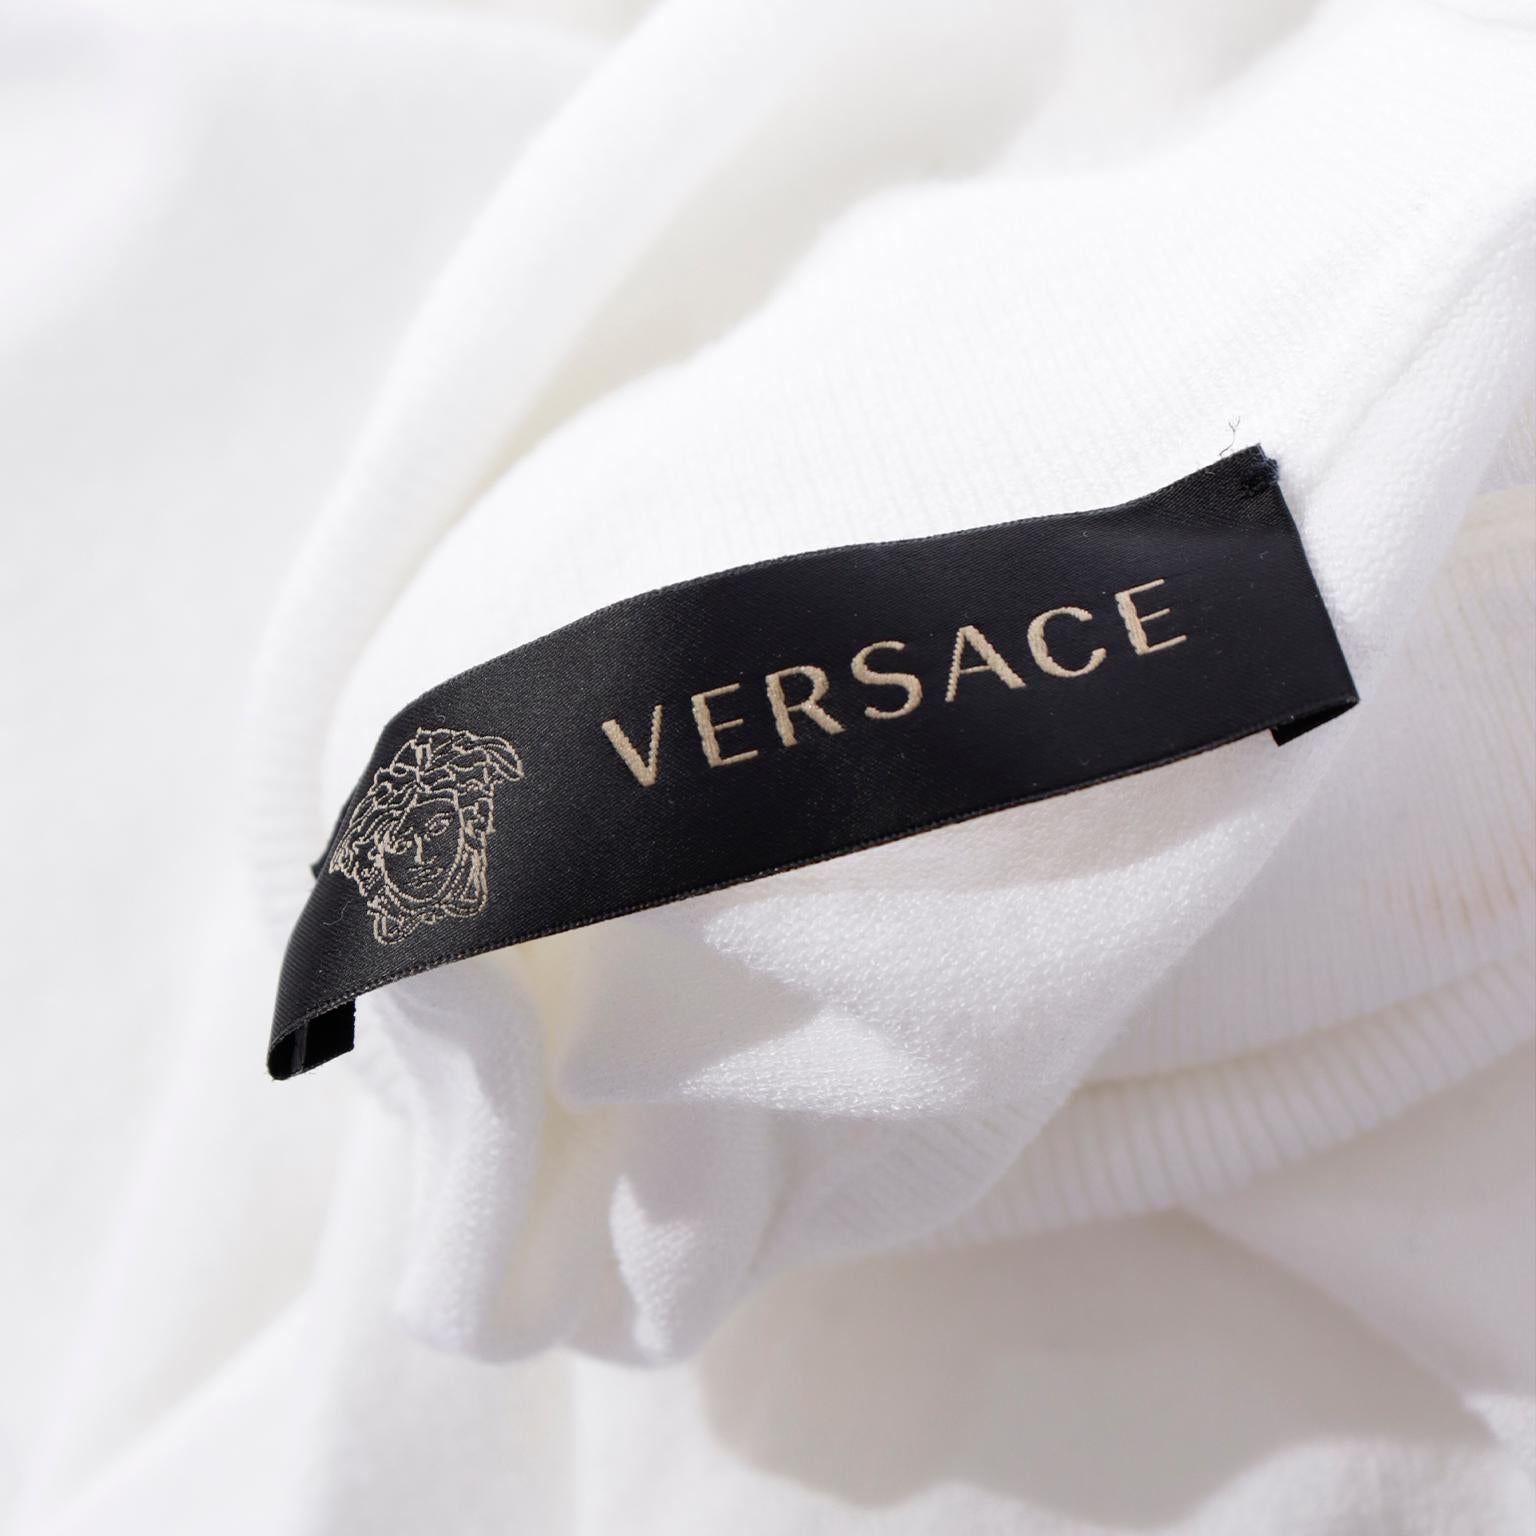 Versace White Knit Long Sleeve Turtleneck Summer Top W Cut Outs at Shoulder For Sale 3